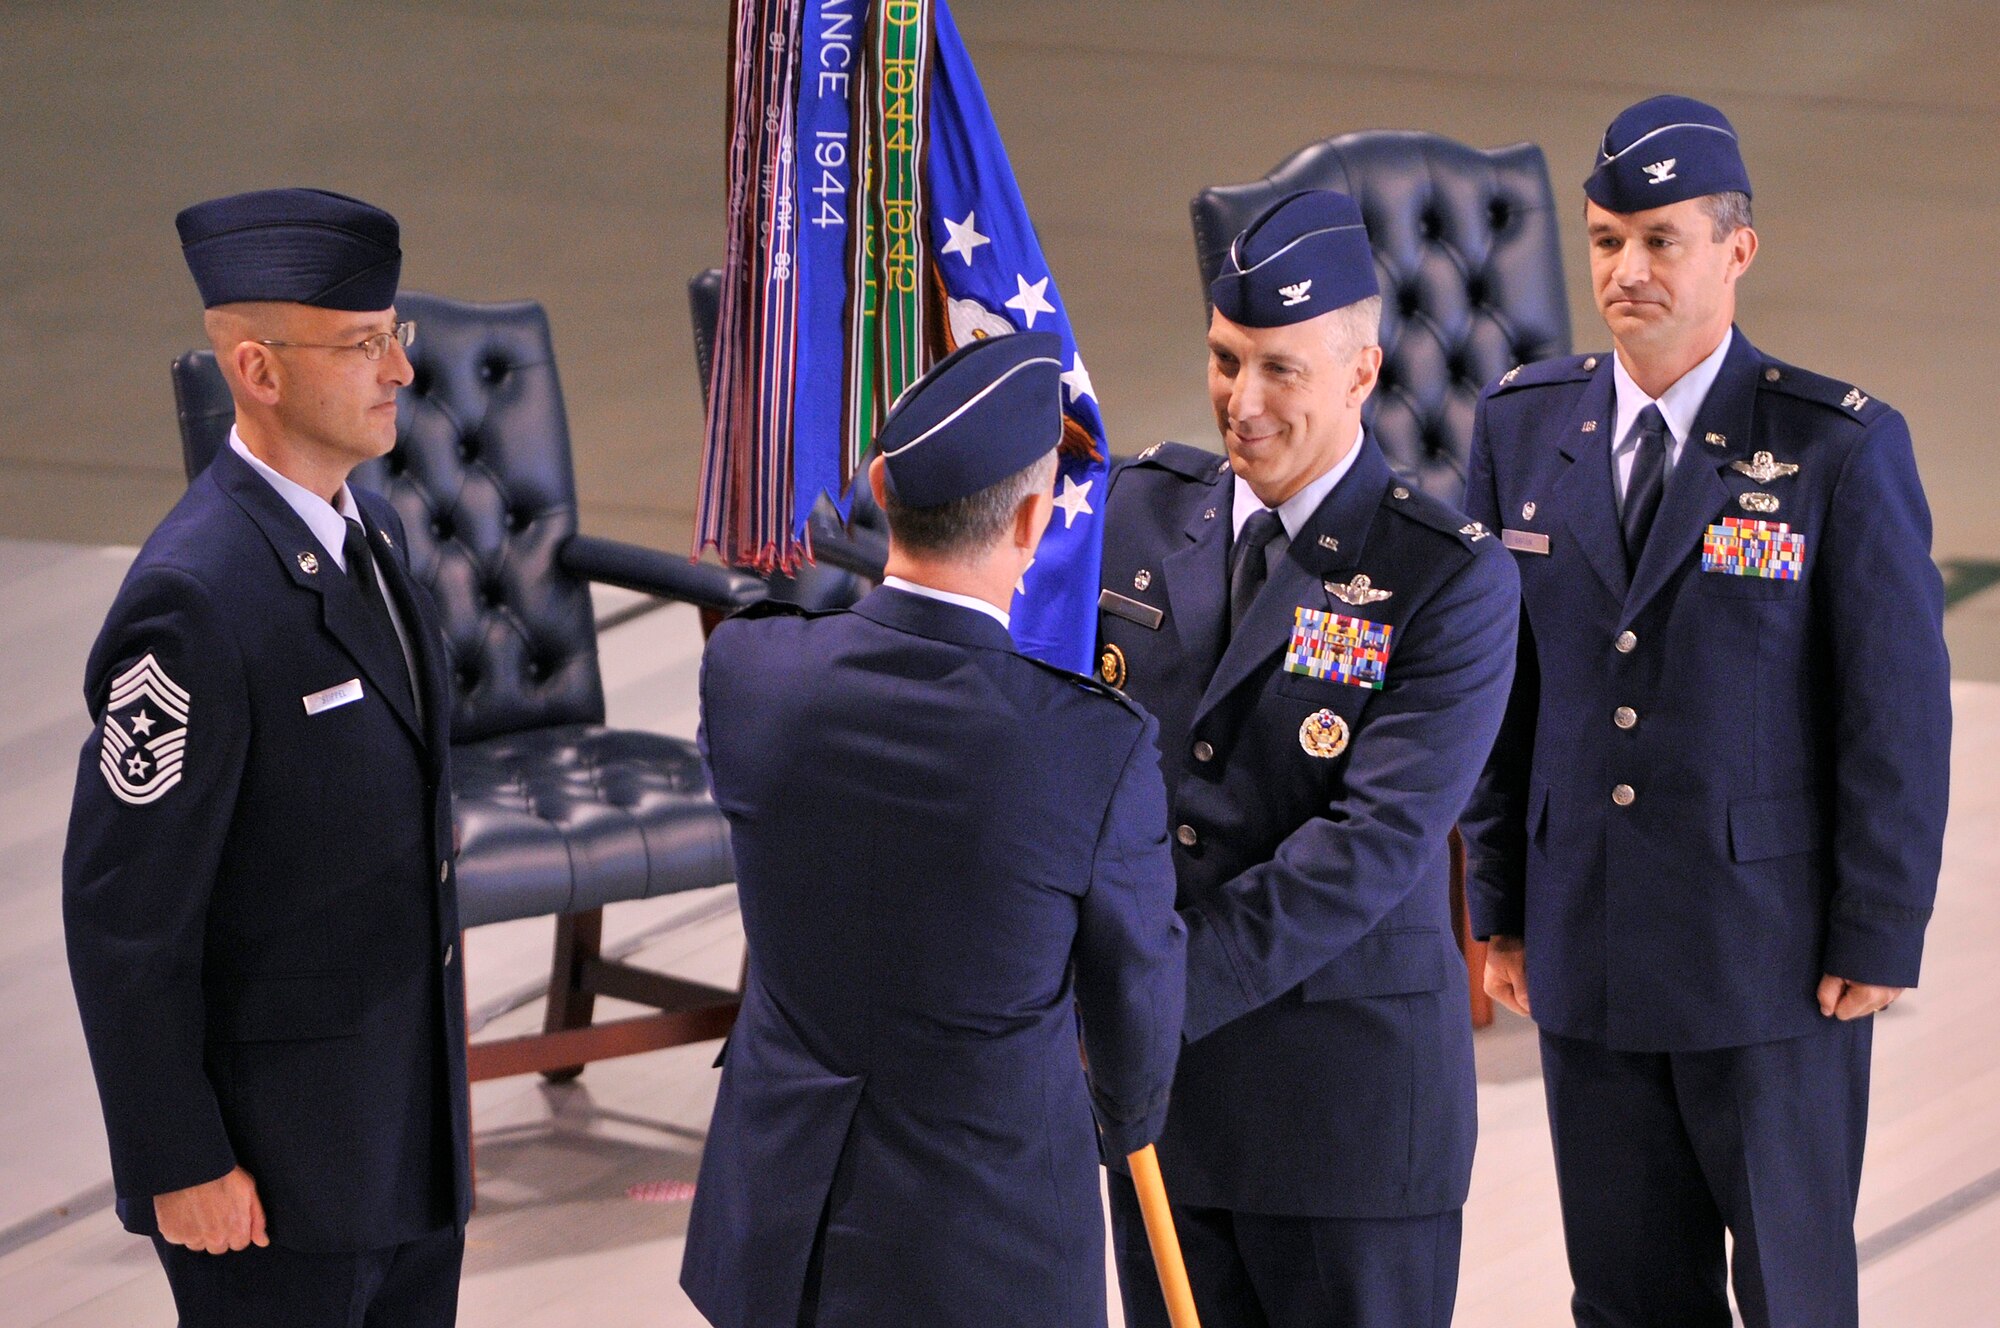 U.S. Air Force Col. Thomas F. Gould receives the guidon from Maj. Gen. Mark R. Zamzow, 3rd Air Force vice commander, during the 435th Air Base Wing Change of Command ceremony, Ramstein Air Base, Germany, June 11, 2009. (U.S. Air Force photo by Staff Sgt. Stephen J. Otero)